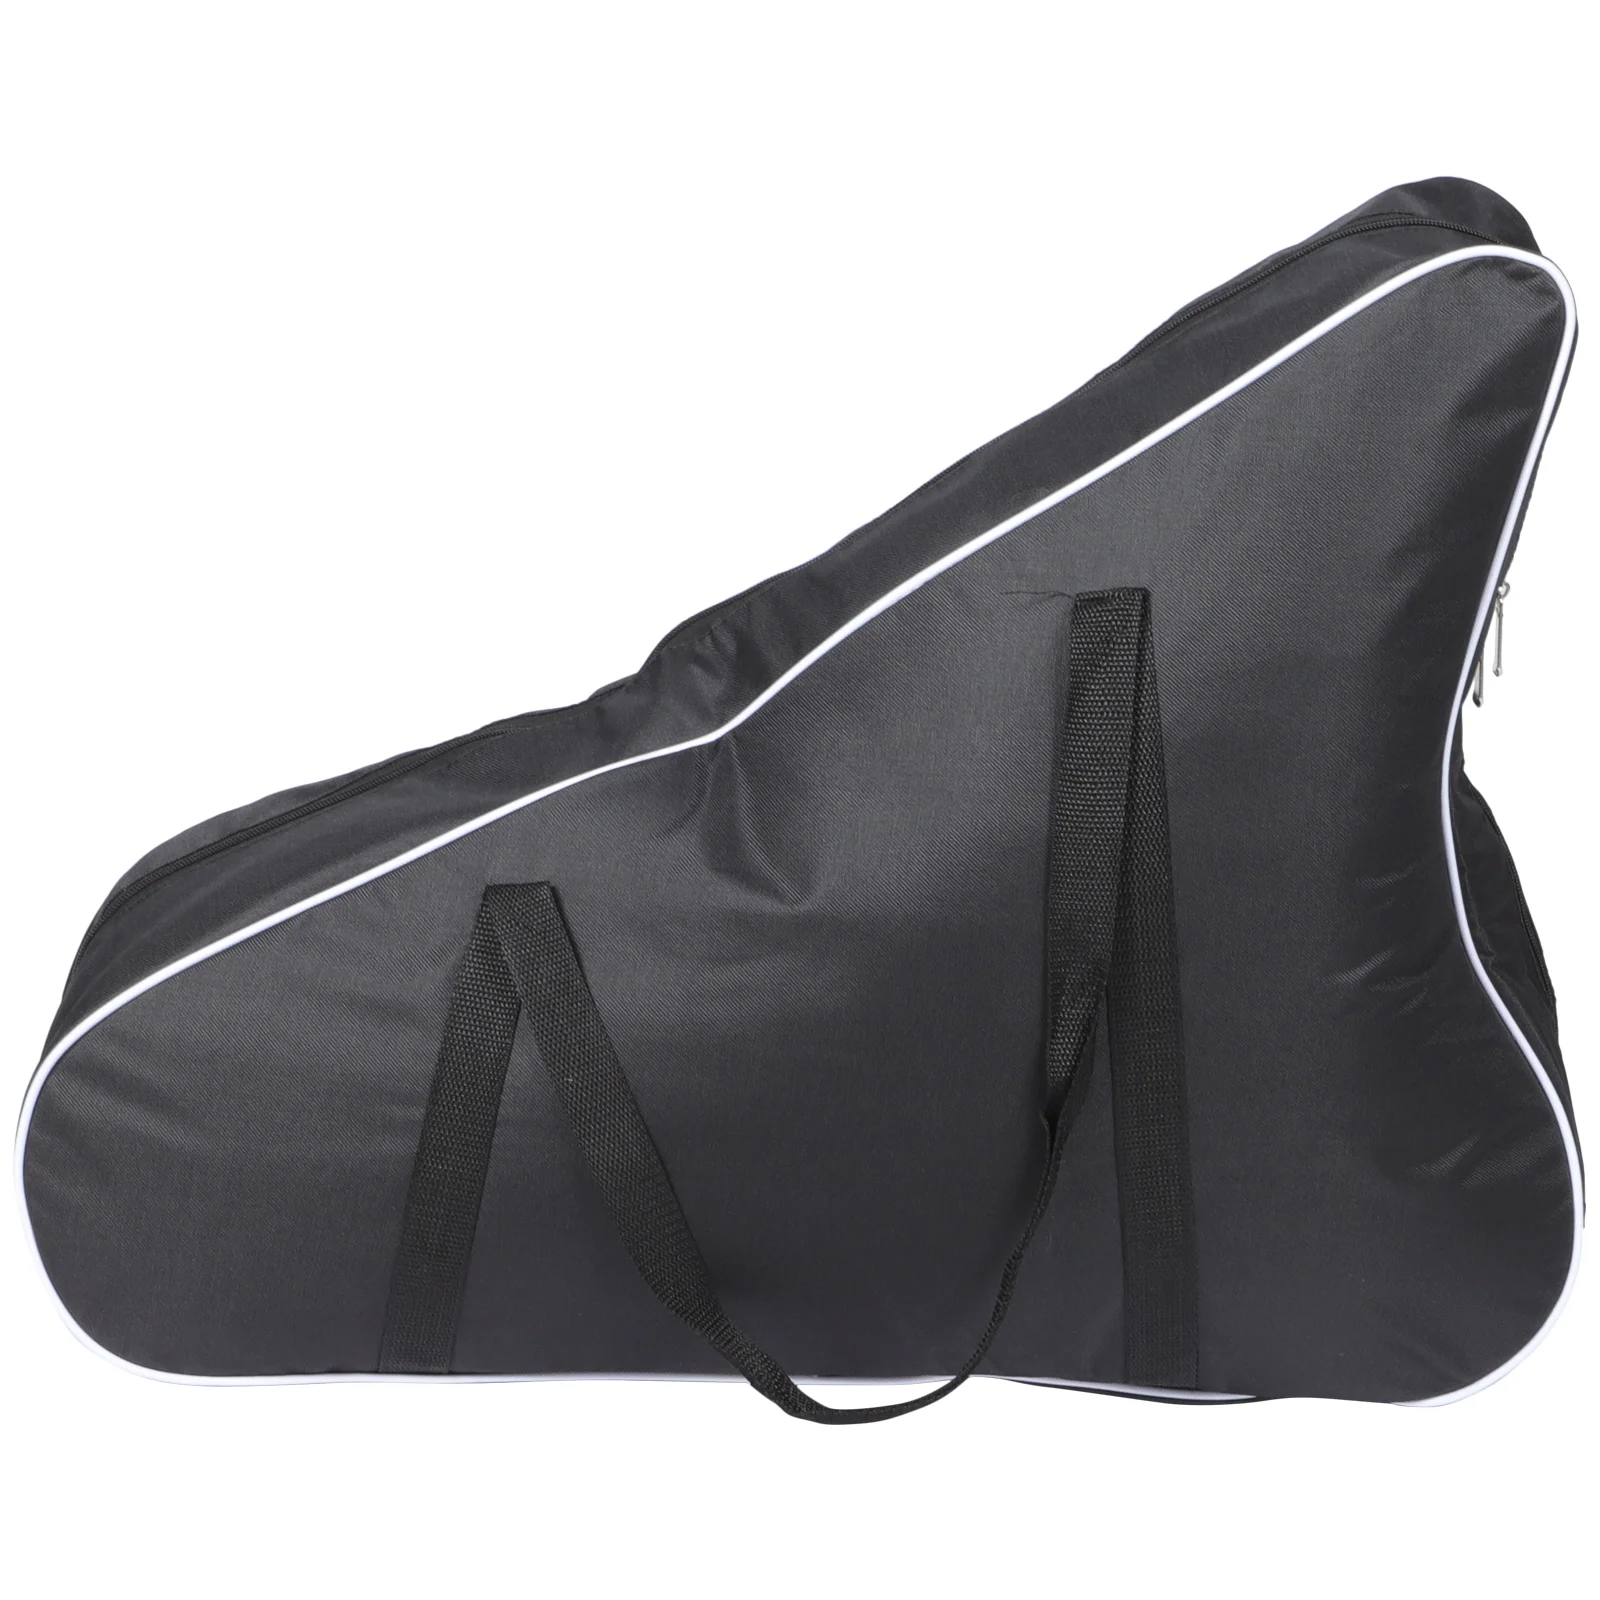 Harp Storage Bag Thumb Piano Carry Musical Instrument Bags Portable Lyre Case Oxford Cloth Tool Carrying Handbags